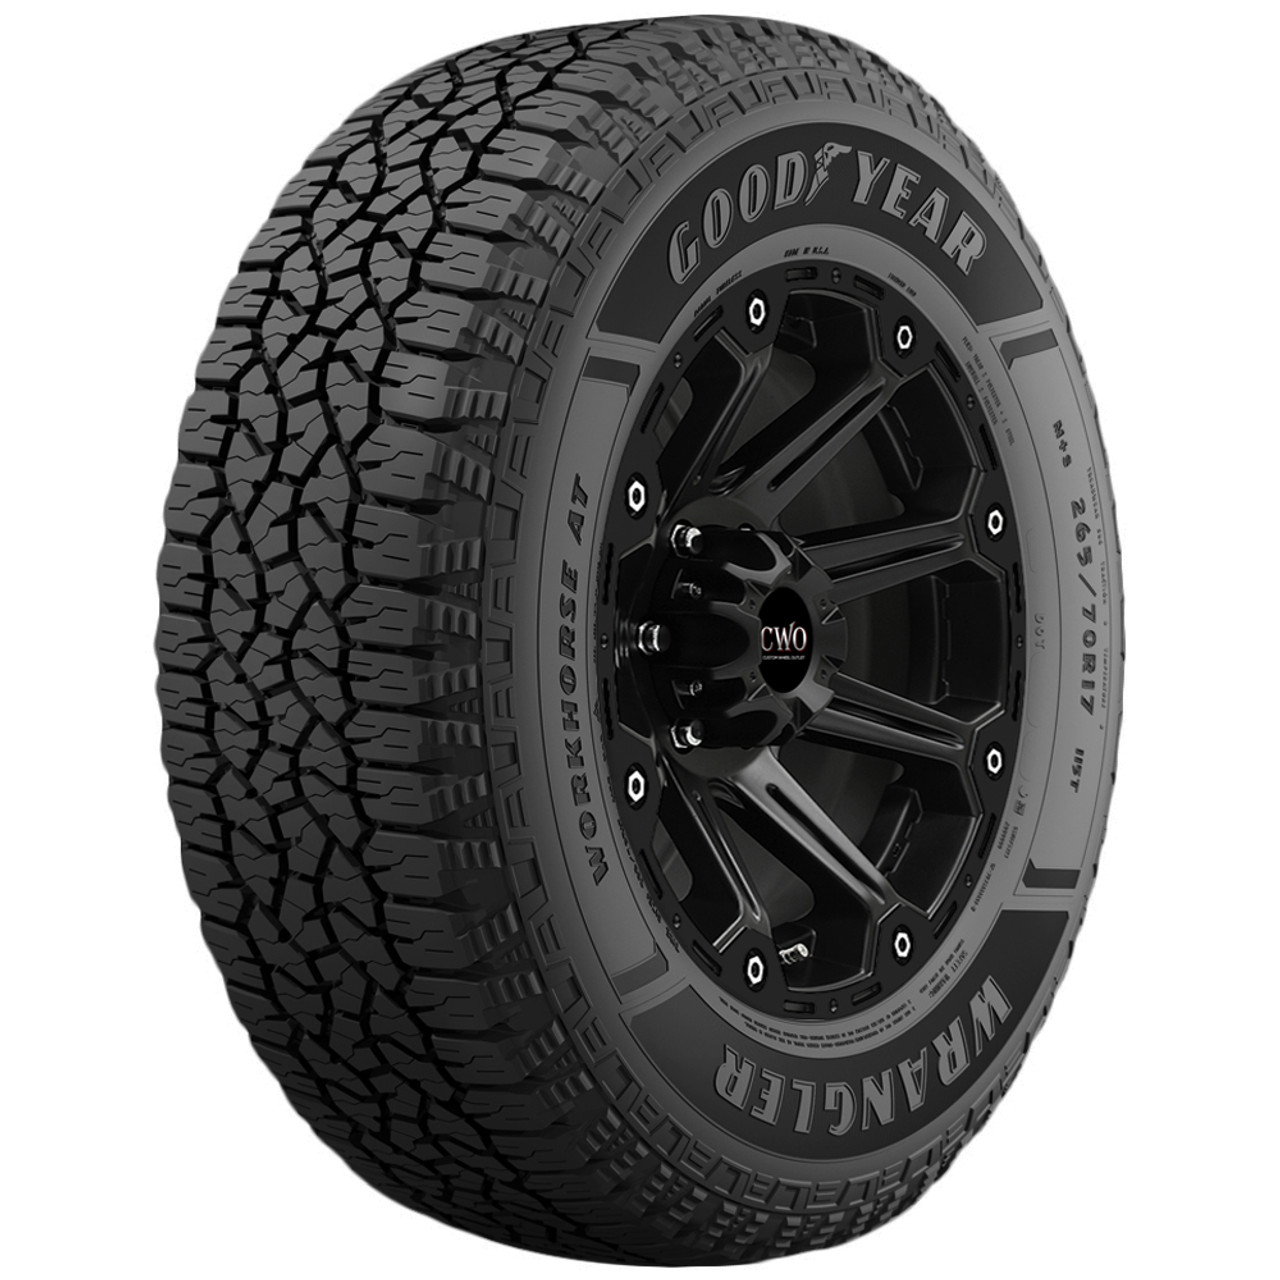 245/70R16 Goodyear Wrangler Workhorse AT 107T SL/4 Ply White Letter Tire  480762856 - ShopCWO